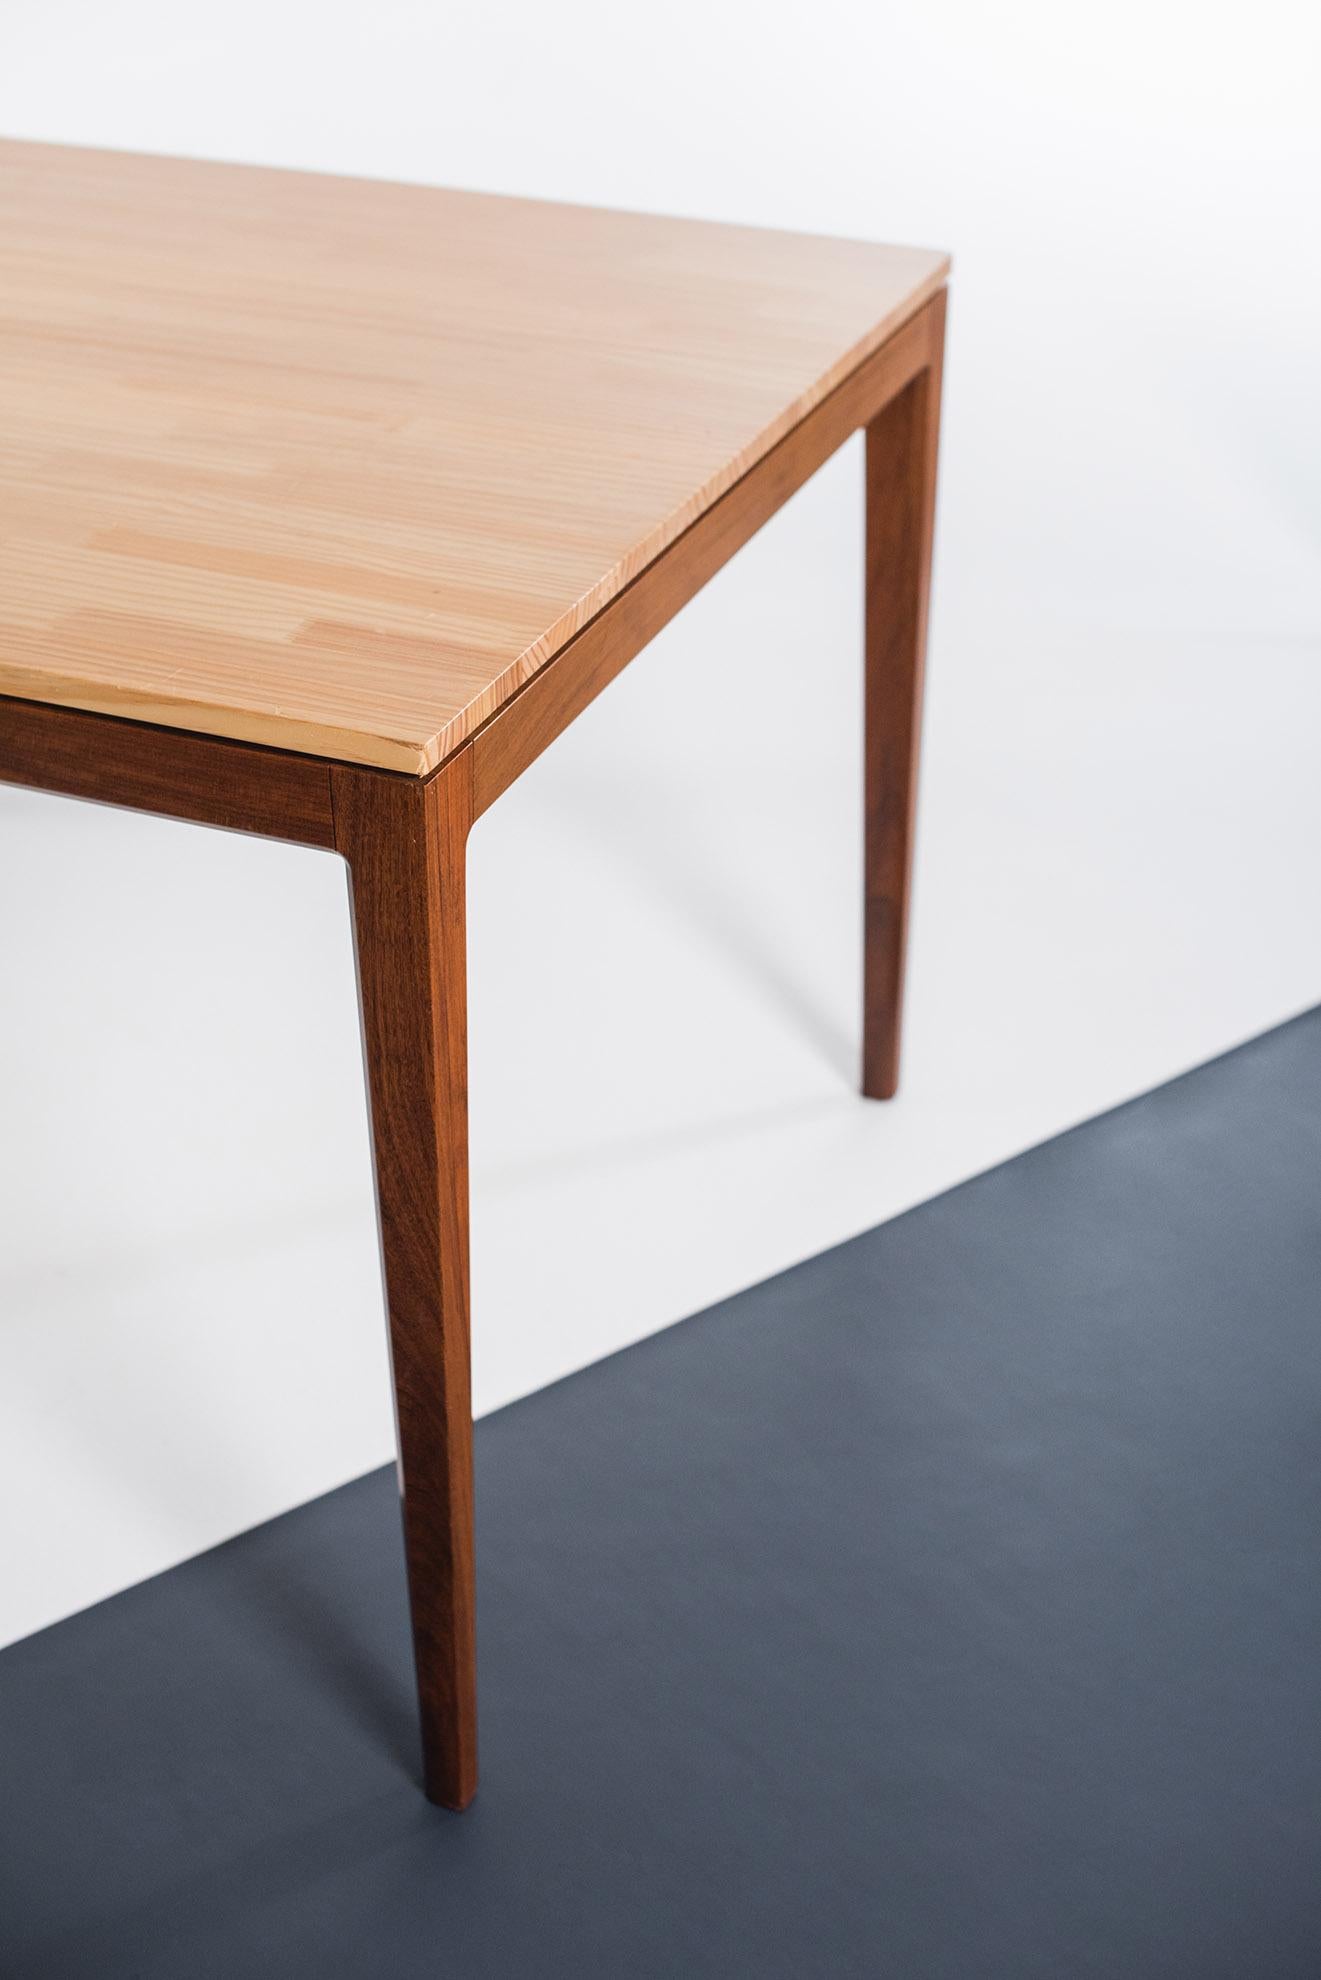 Hand-Crafted Imirim Table For Sale